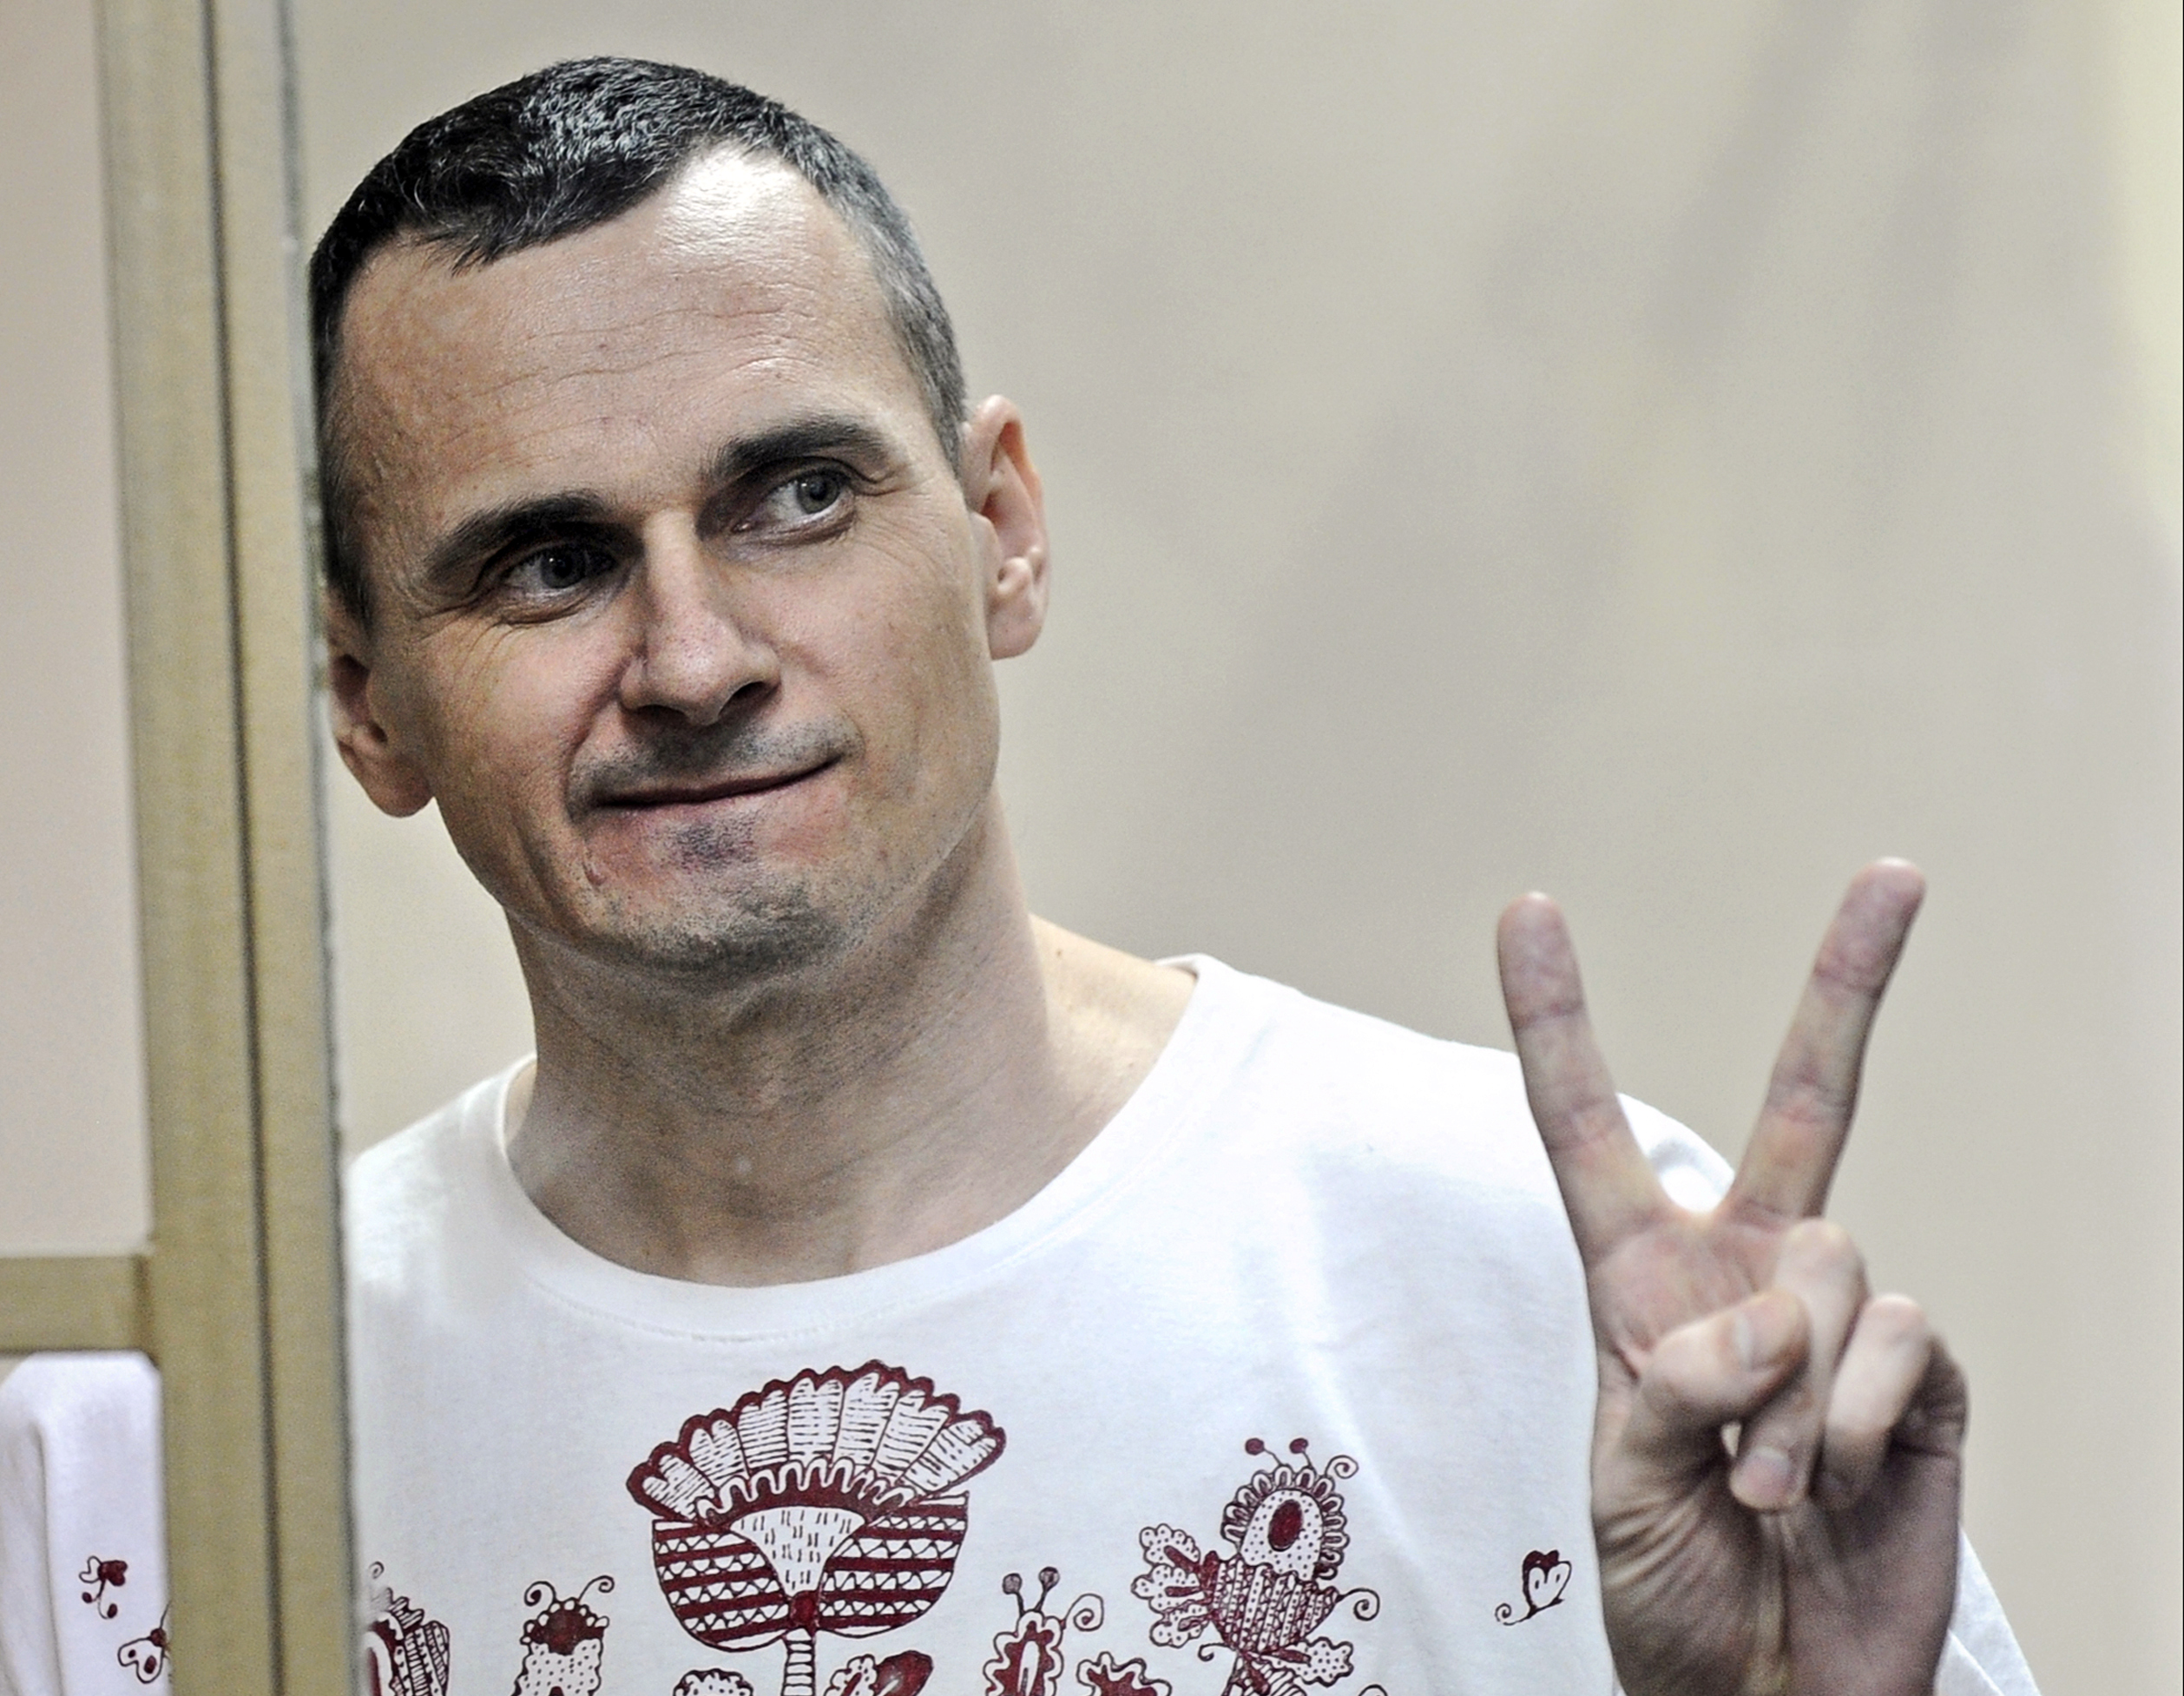 Oleg Sentsov gestures as the verdict is delivered, as he stands behind bars at a court in Rostov-on-Don, Russia, on Aug. 25, 2015 (STR—AP)